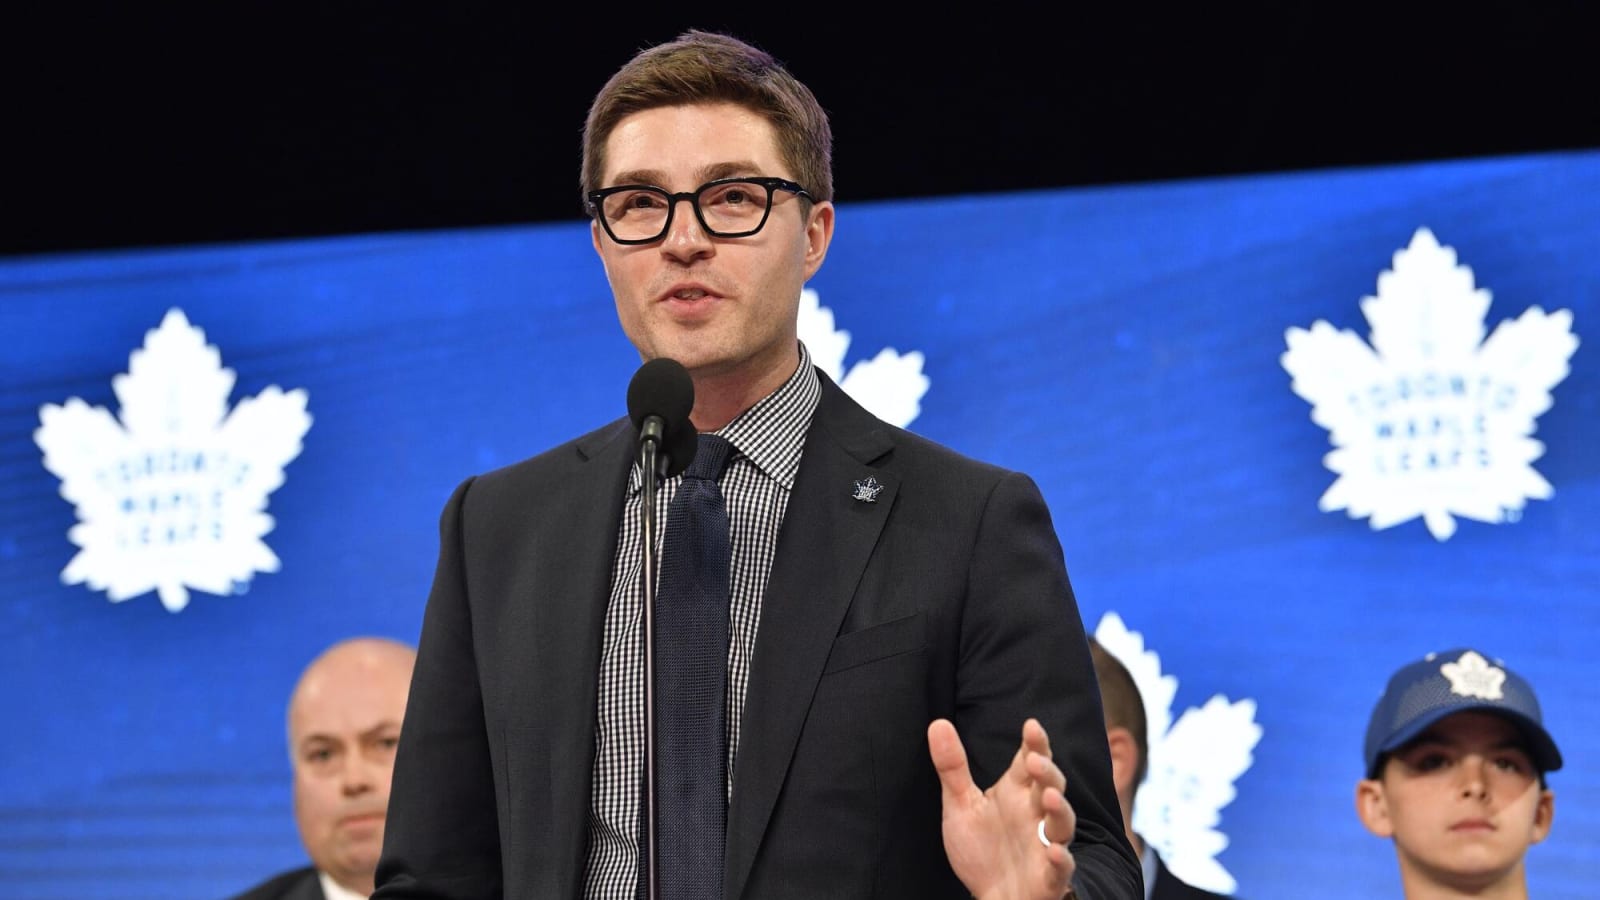 Kyle Dubas won’t return as the general manager of the Toronto Maple Leafs